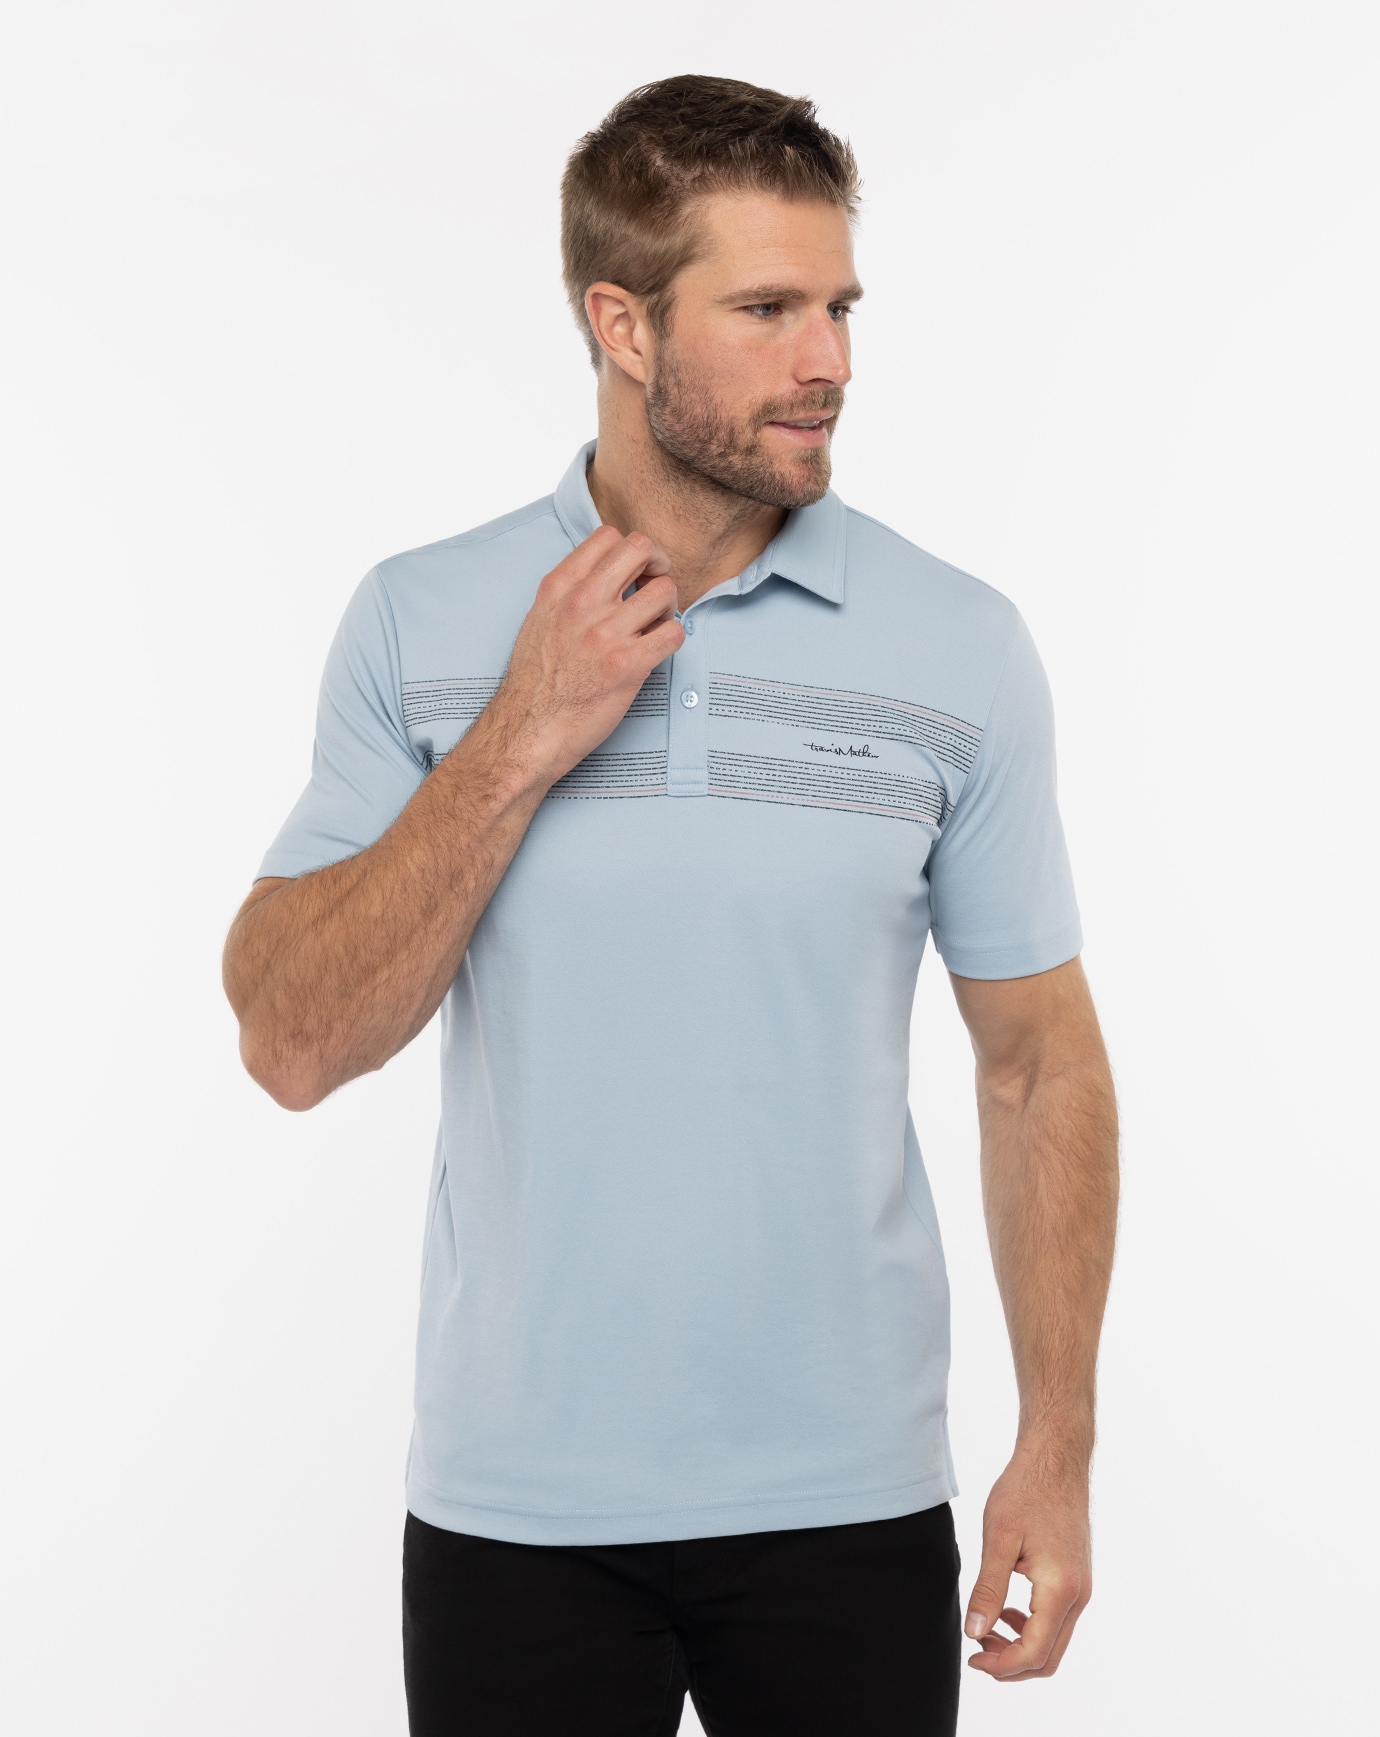 Related Product - SAN PEDRO POLO